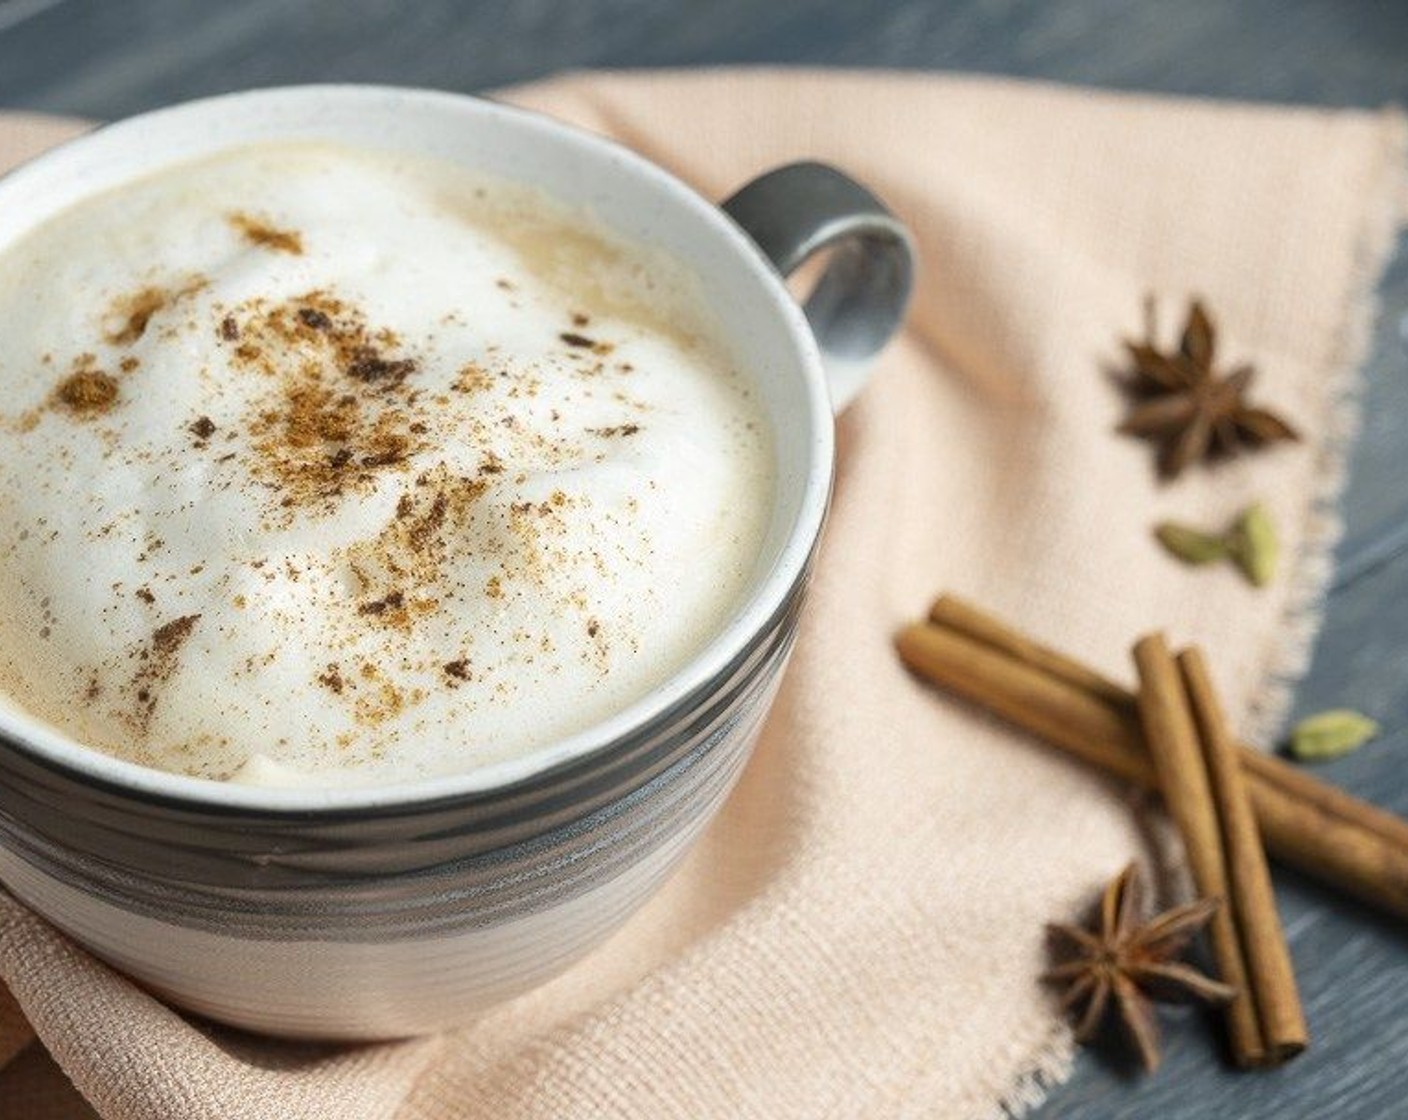 step 6 Warm and froth Unsweetened Almond Milk (2 cups). Pour 1/2 cup hot chai concentrate into a mug and top with 1/2 cup of almond milk and a spoonful or two of froth. Sprinkle with ground cinnamon if desired and serve immediately. Enjoy!